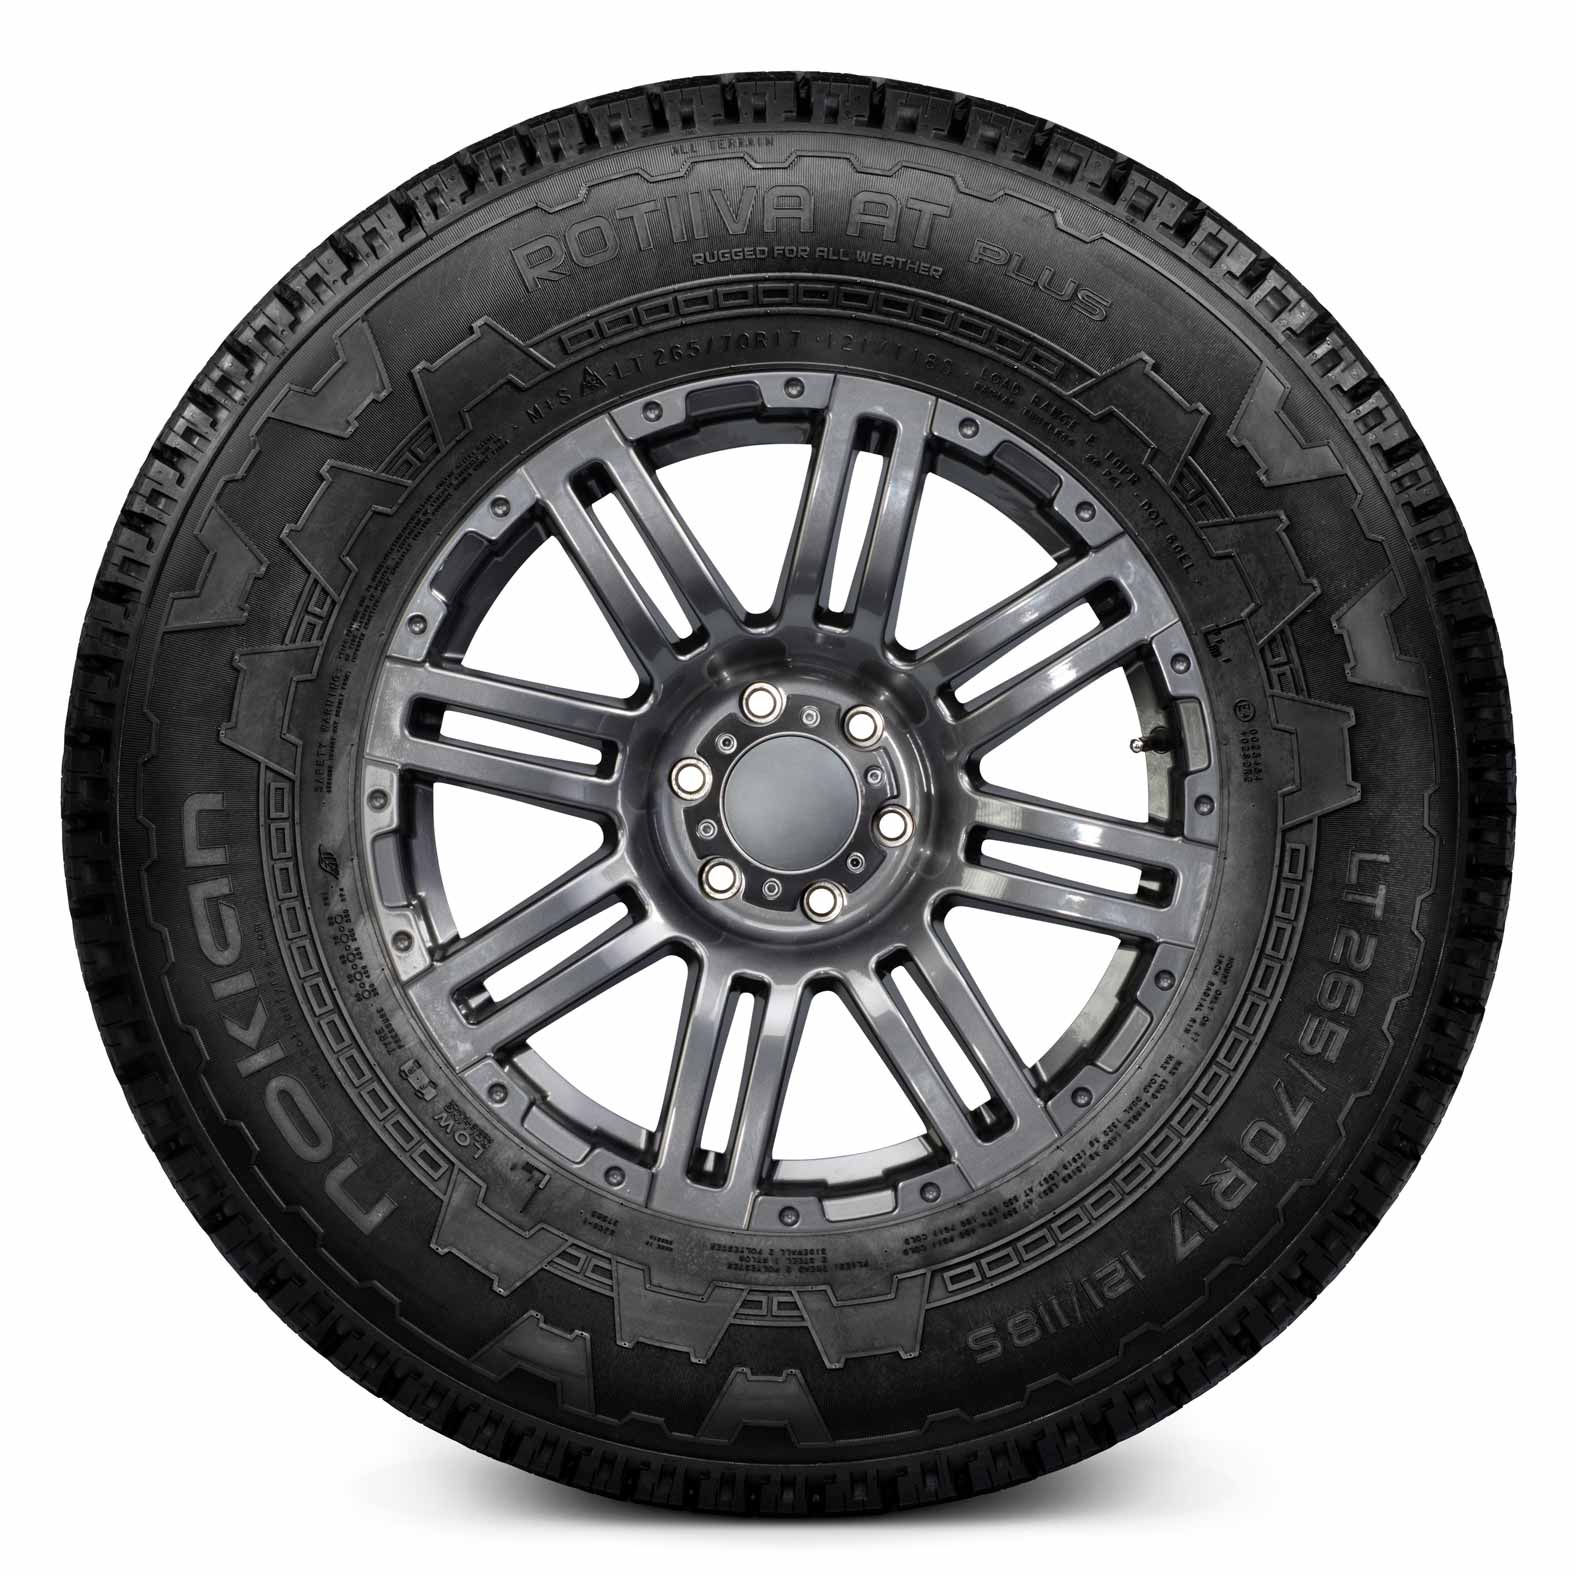 Nokian Rotiiva AT PLUS Tire | Tires All-Terrain for Kal